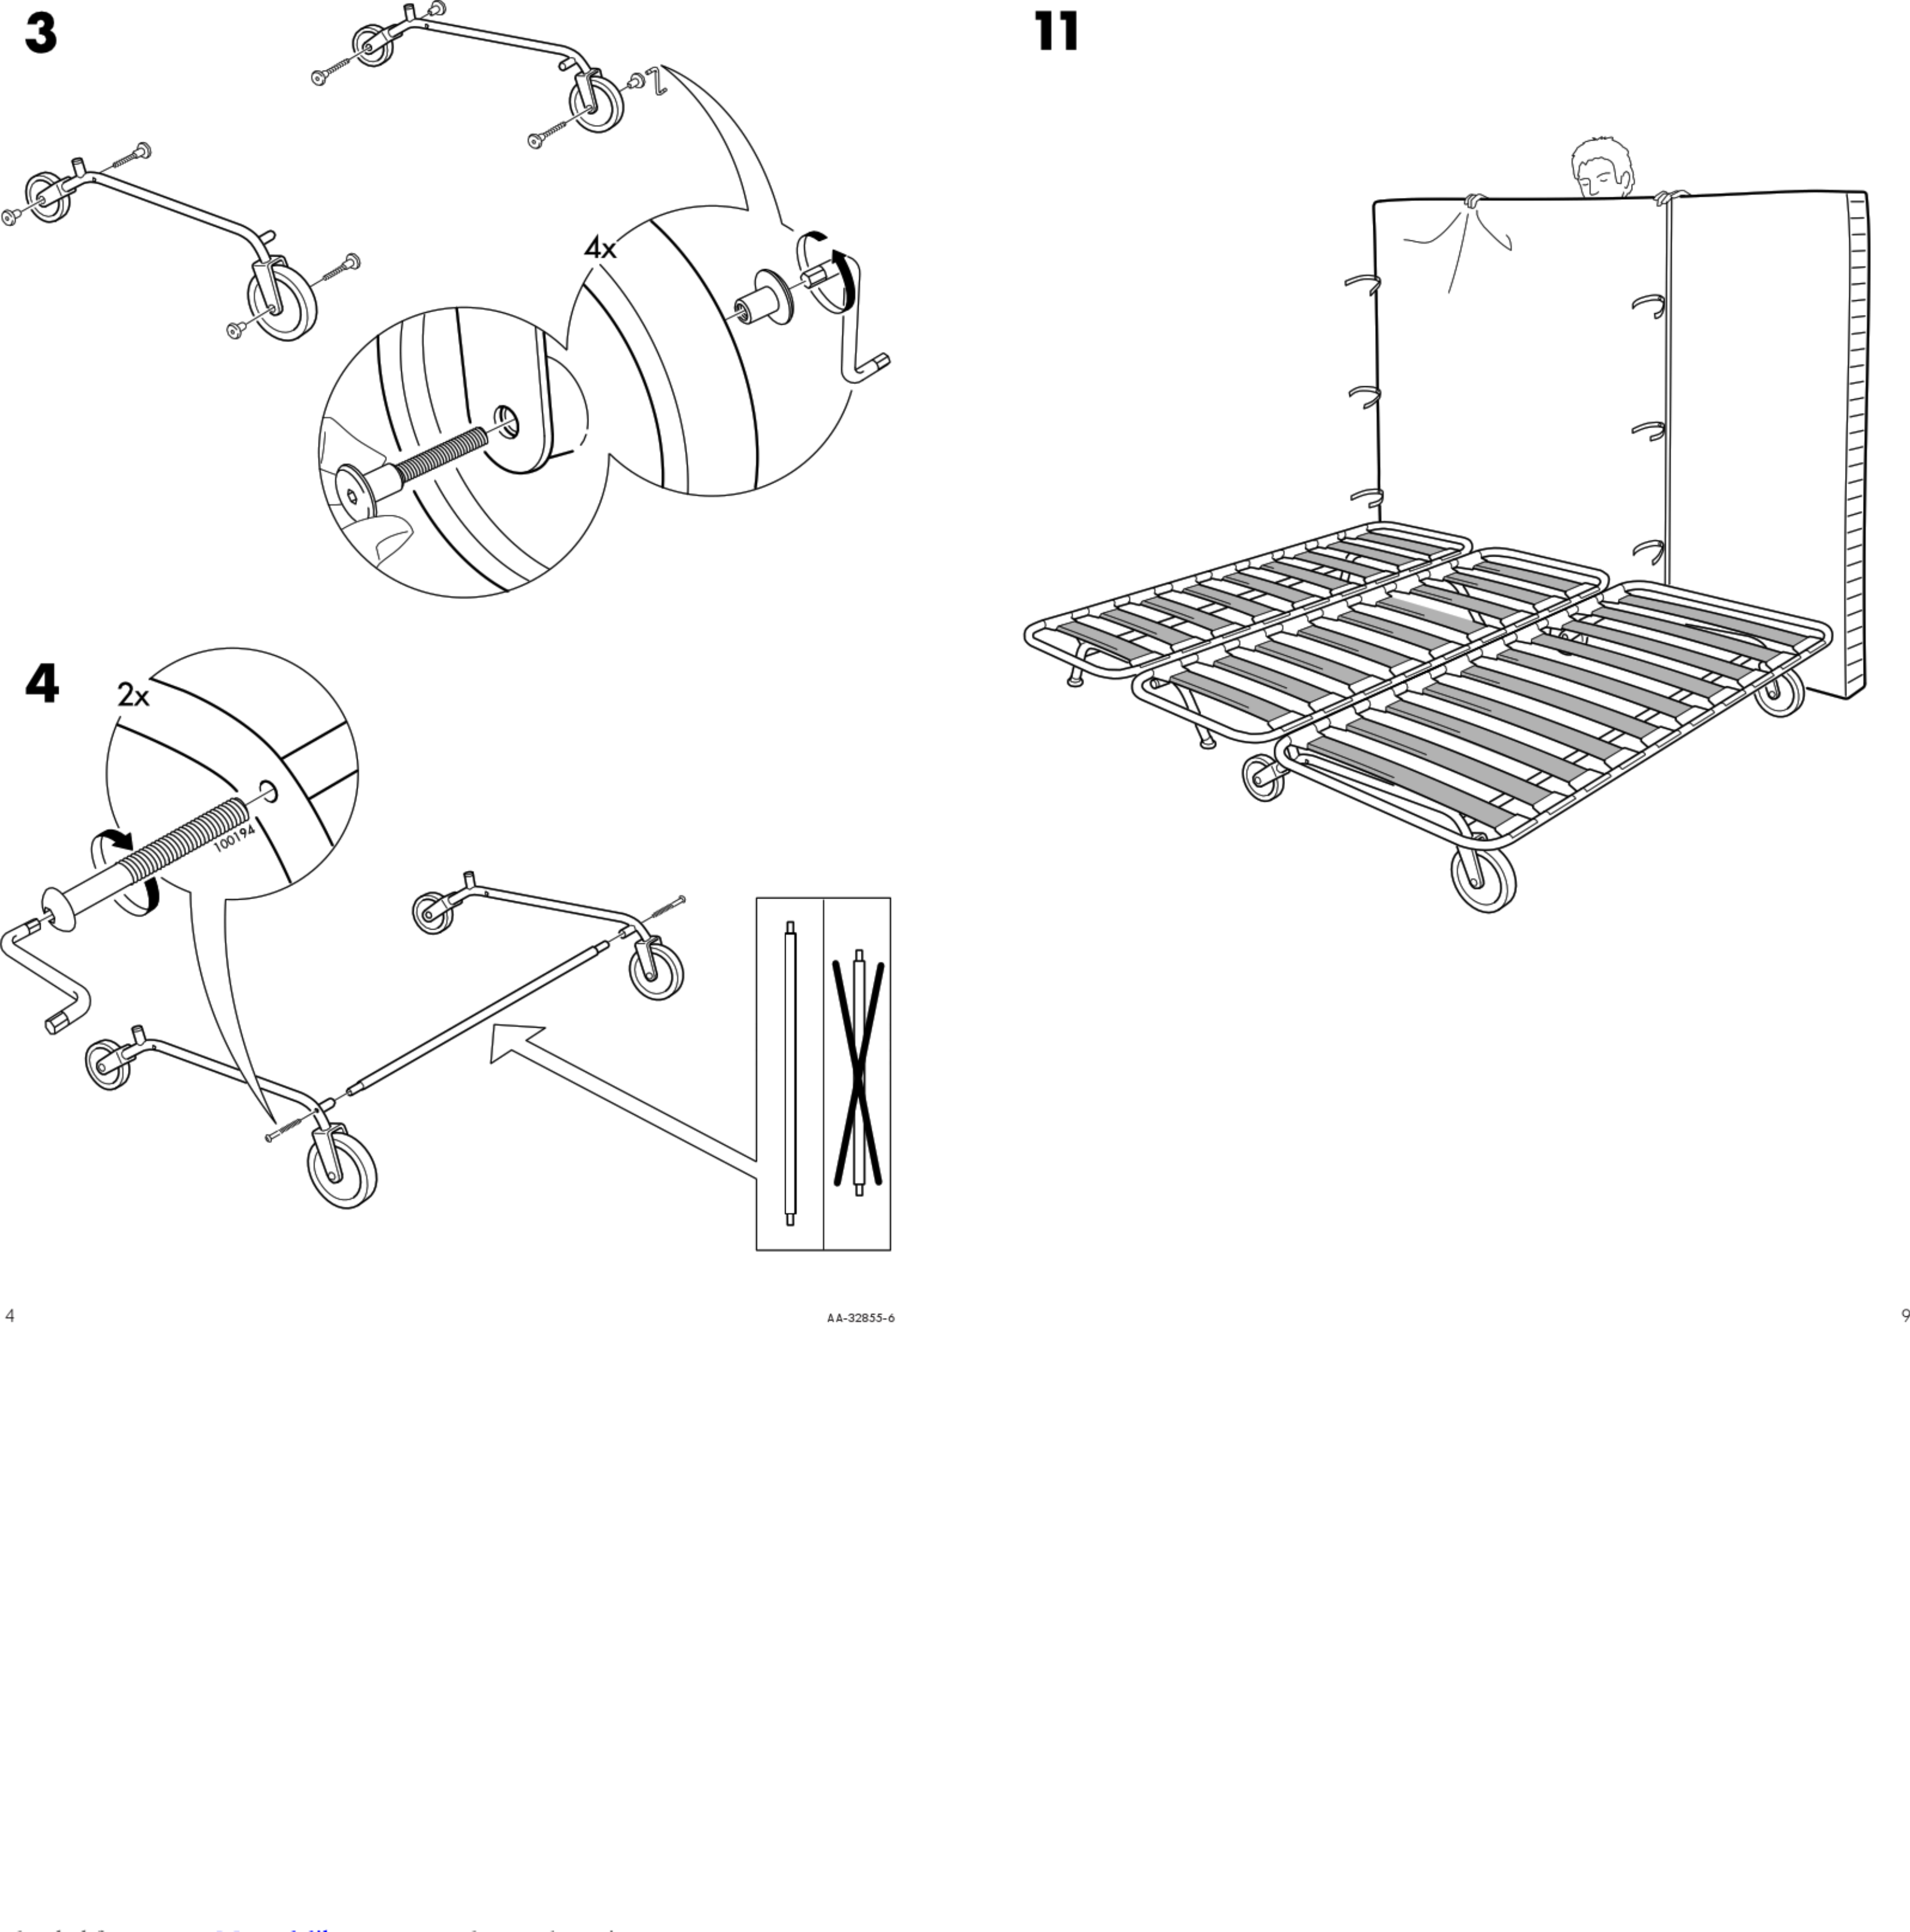 Page 4 of 6 - Ikea Ikea-Ps-Sofa-Bed-Frame-Instructions-Manual-1002790 User Manual